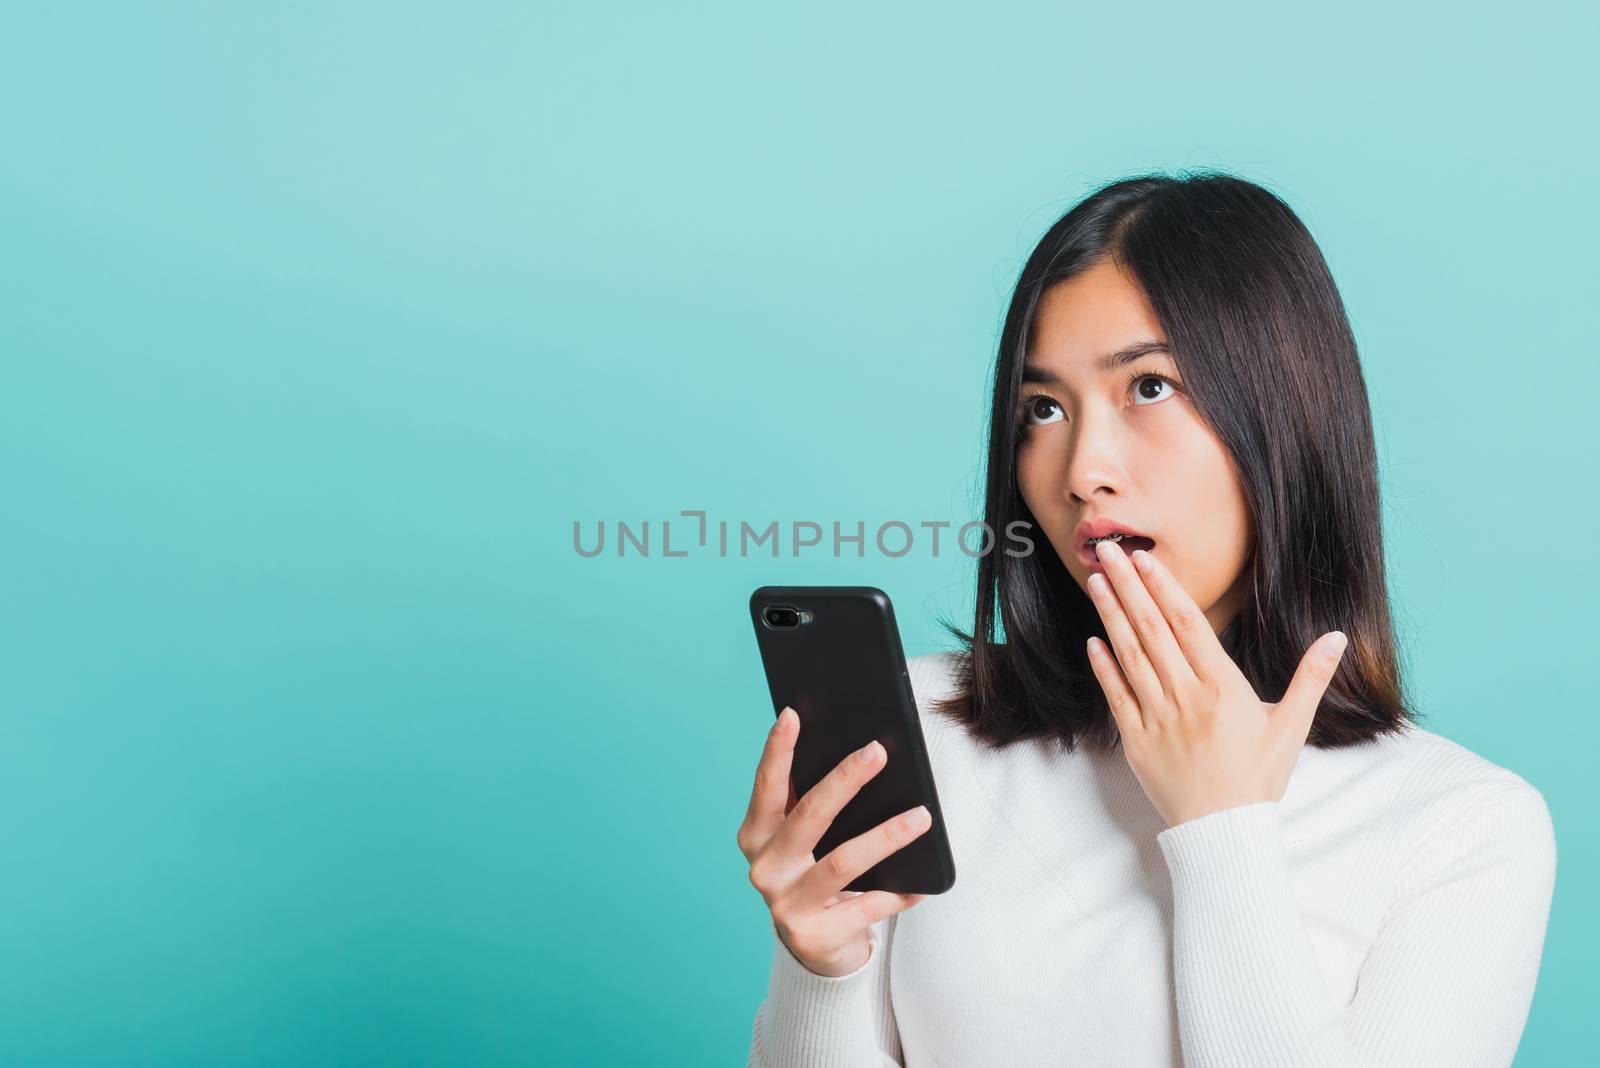 Portrait female anxious scared on the phone seeing bad news, Young beautiful Asian woman surprised shocked with mobile phone close mouth with palm, studio shot isolated on a blue background